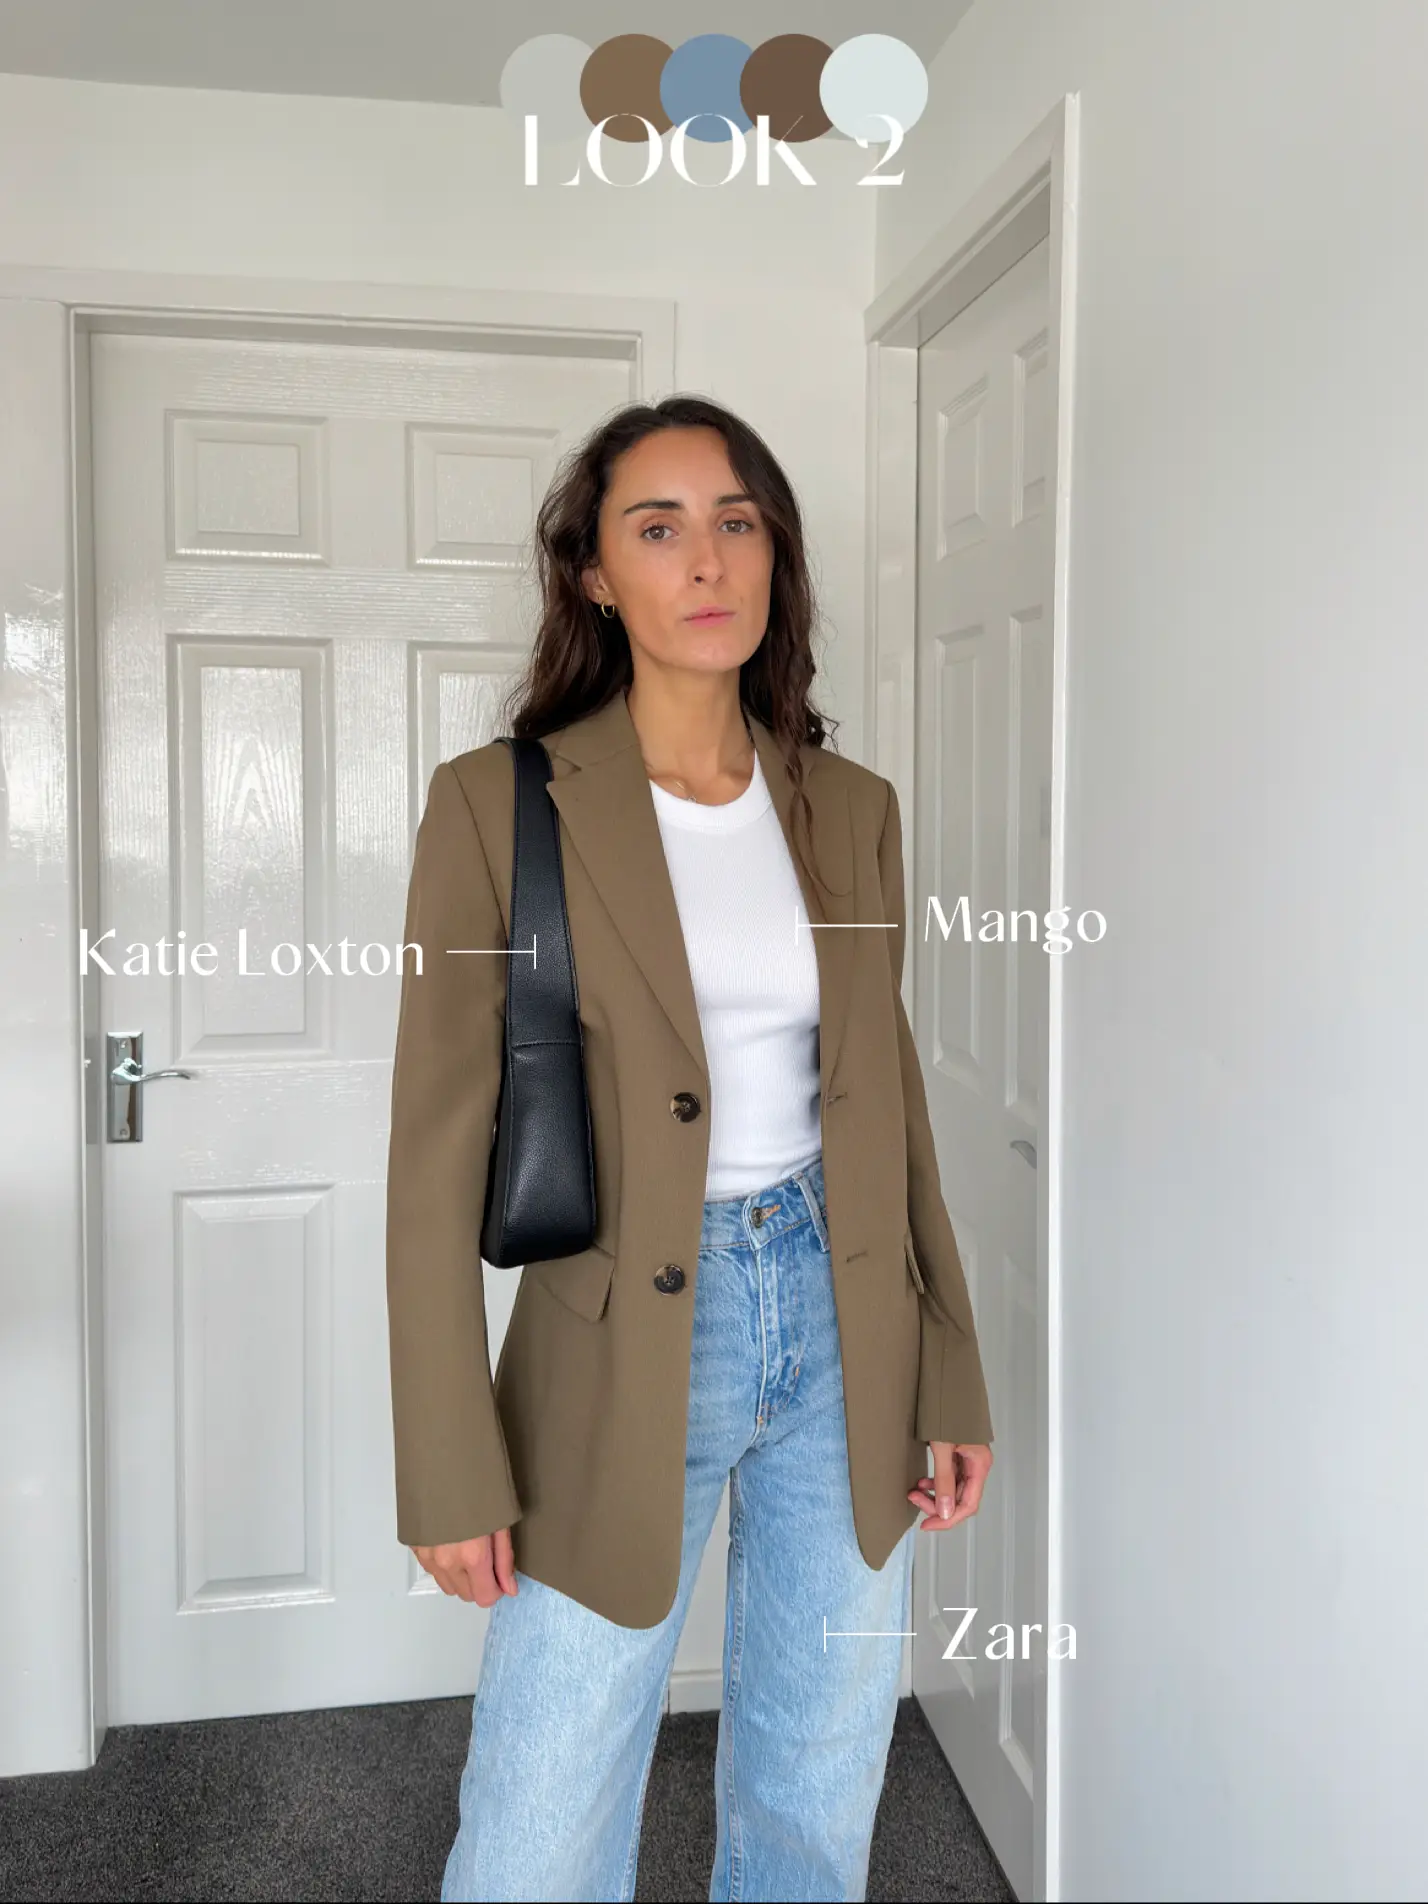 ZARA Faux Leather Jacket Review  Gallery posted by Nicole Nabi